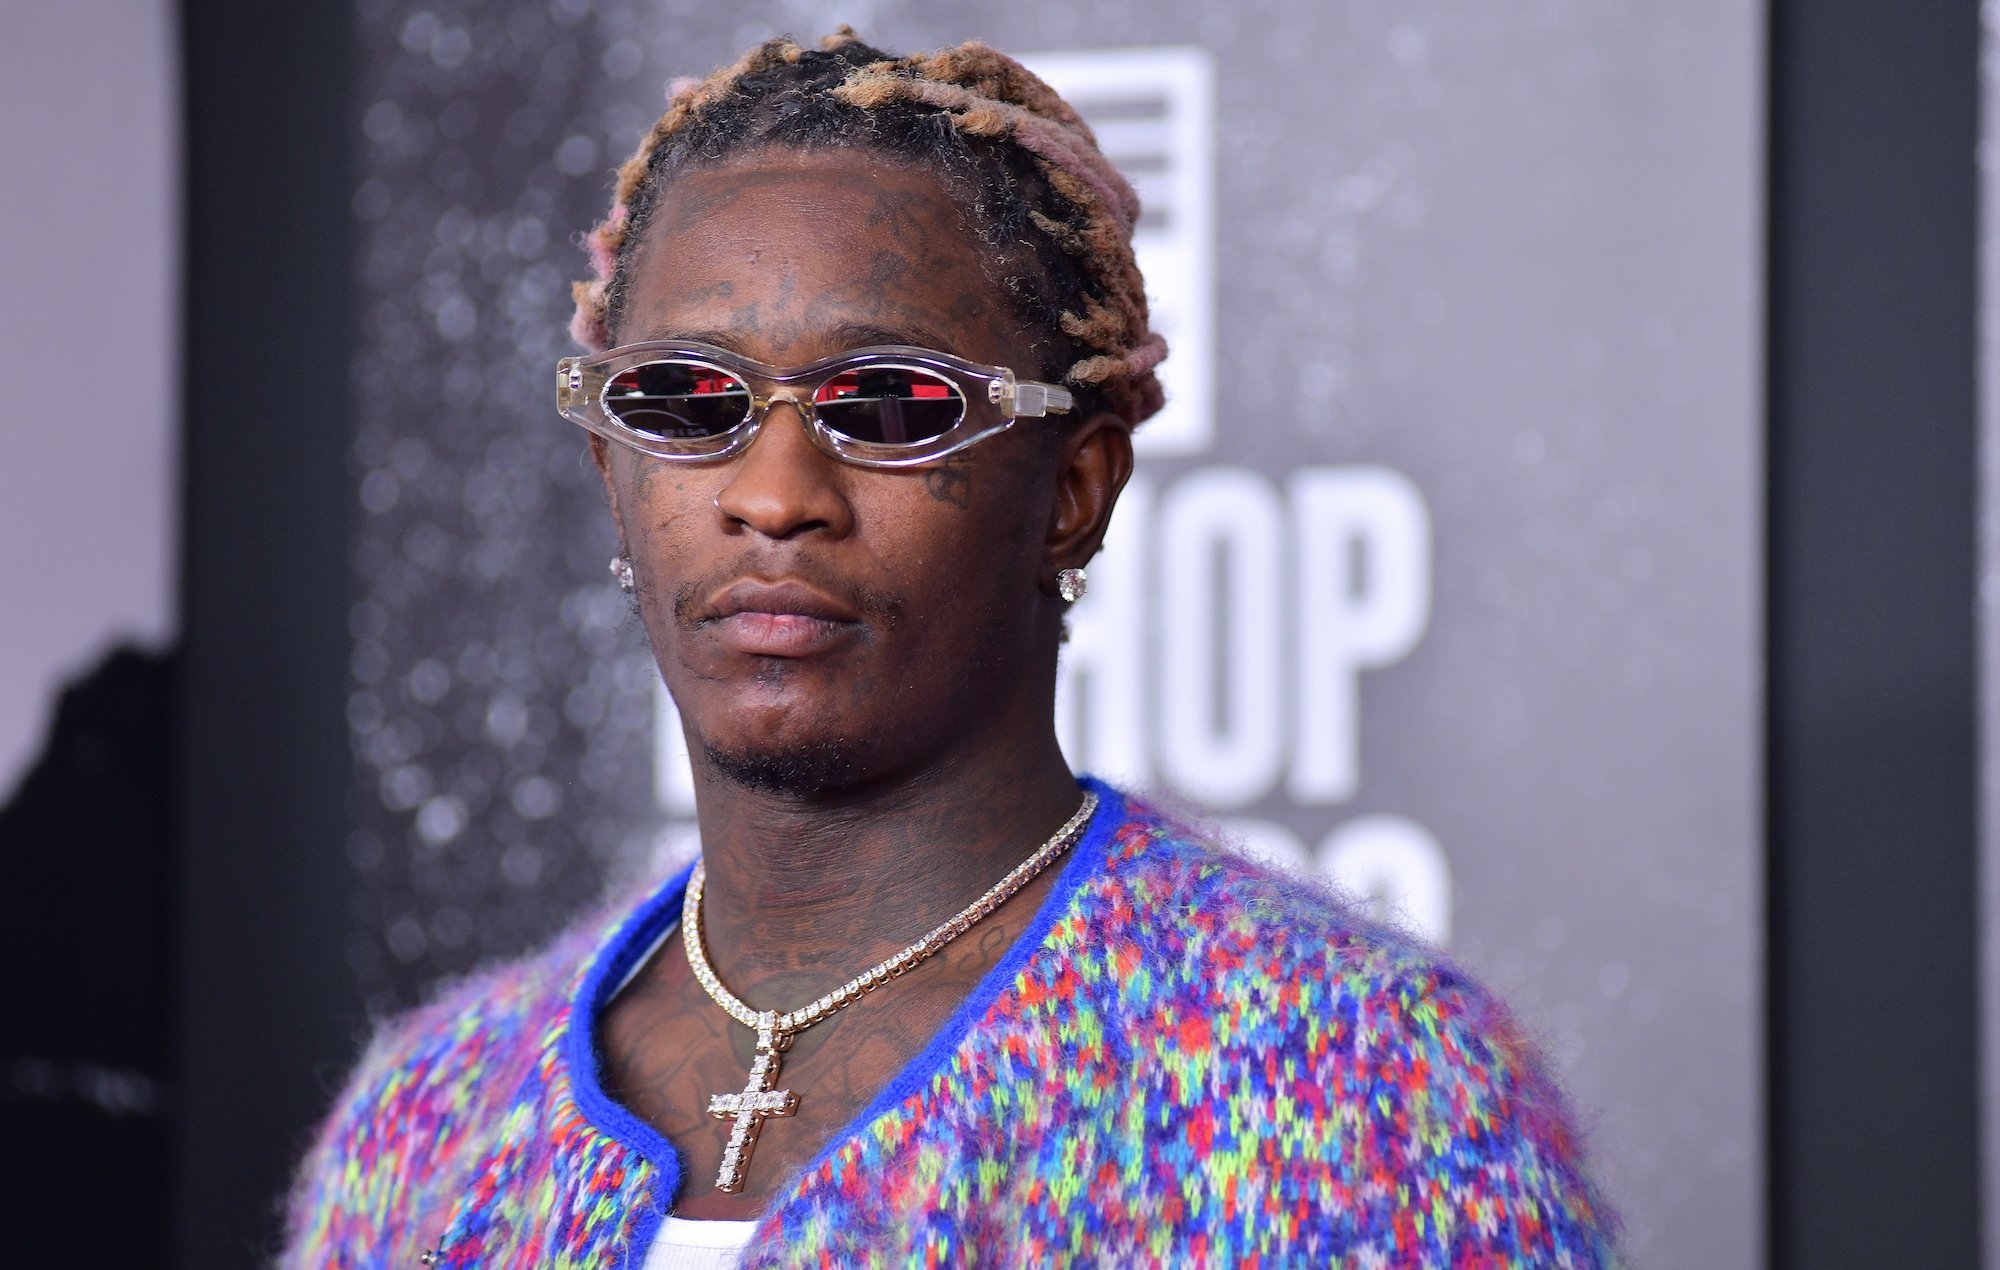 Young Thug trial delayed further after judge removed